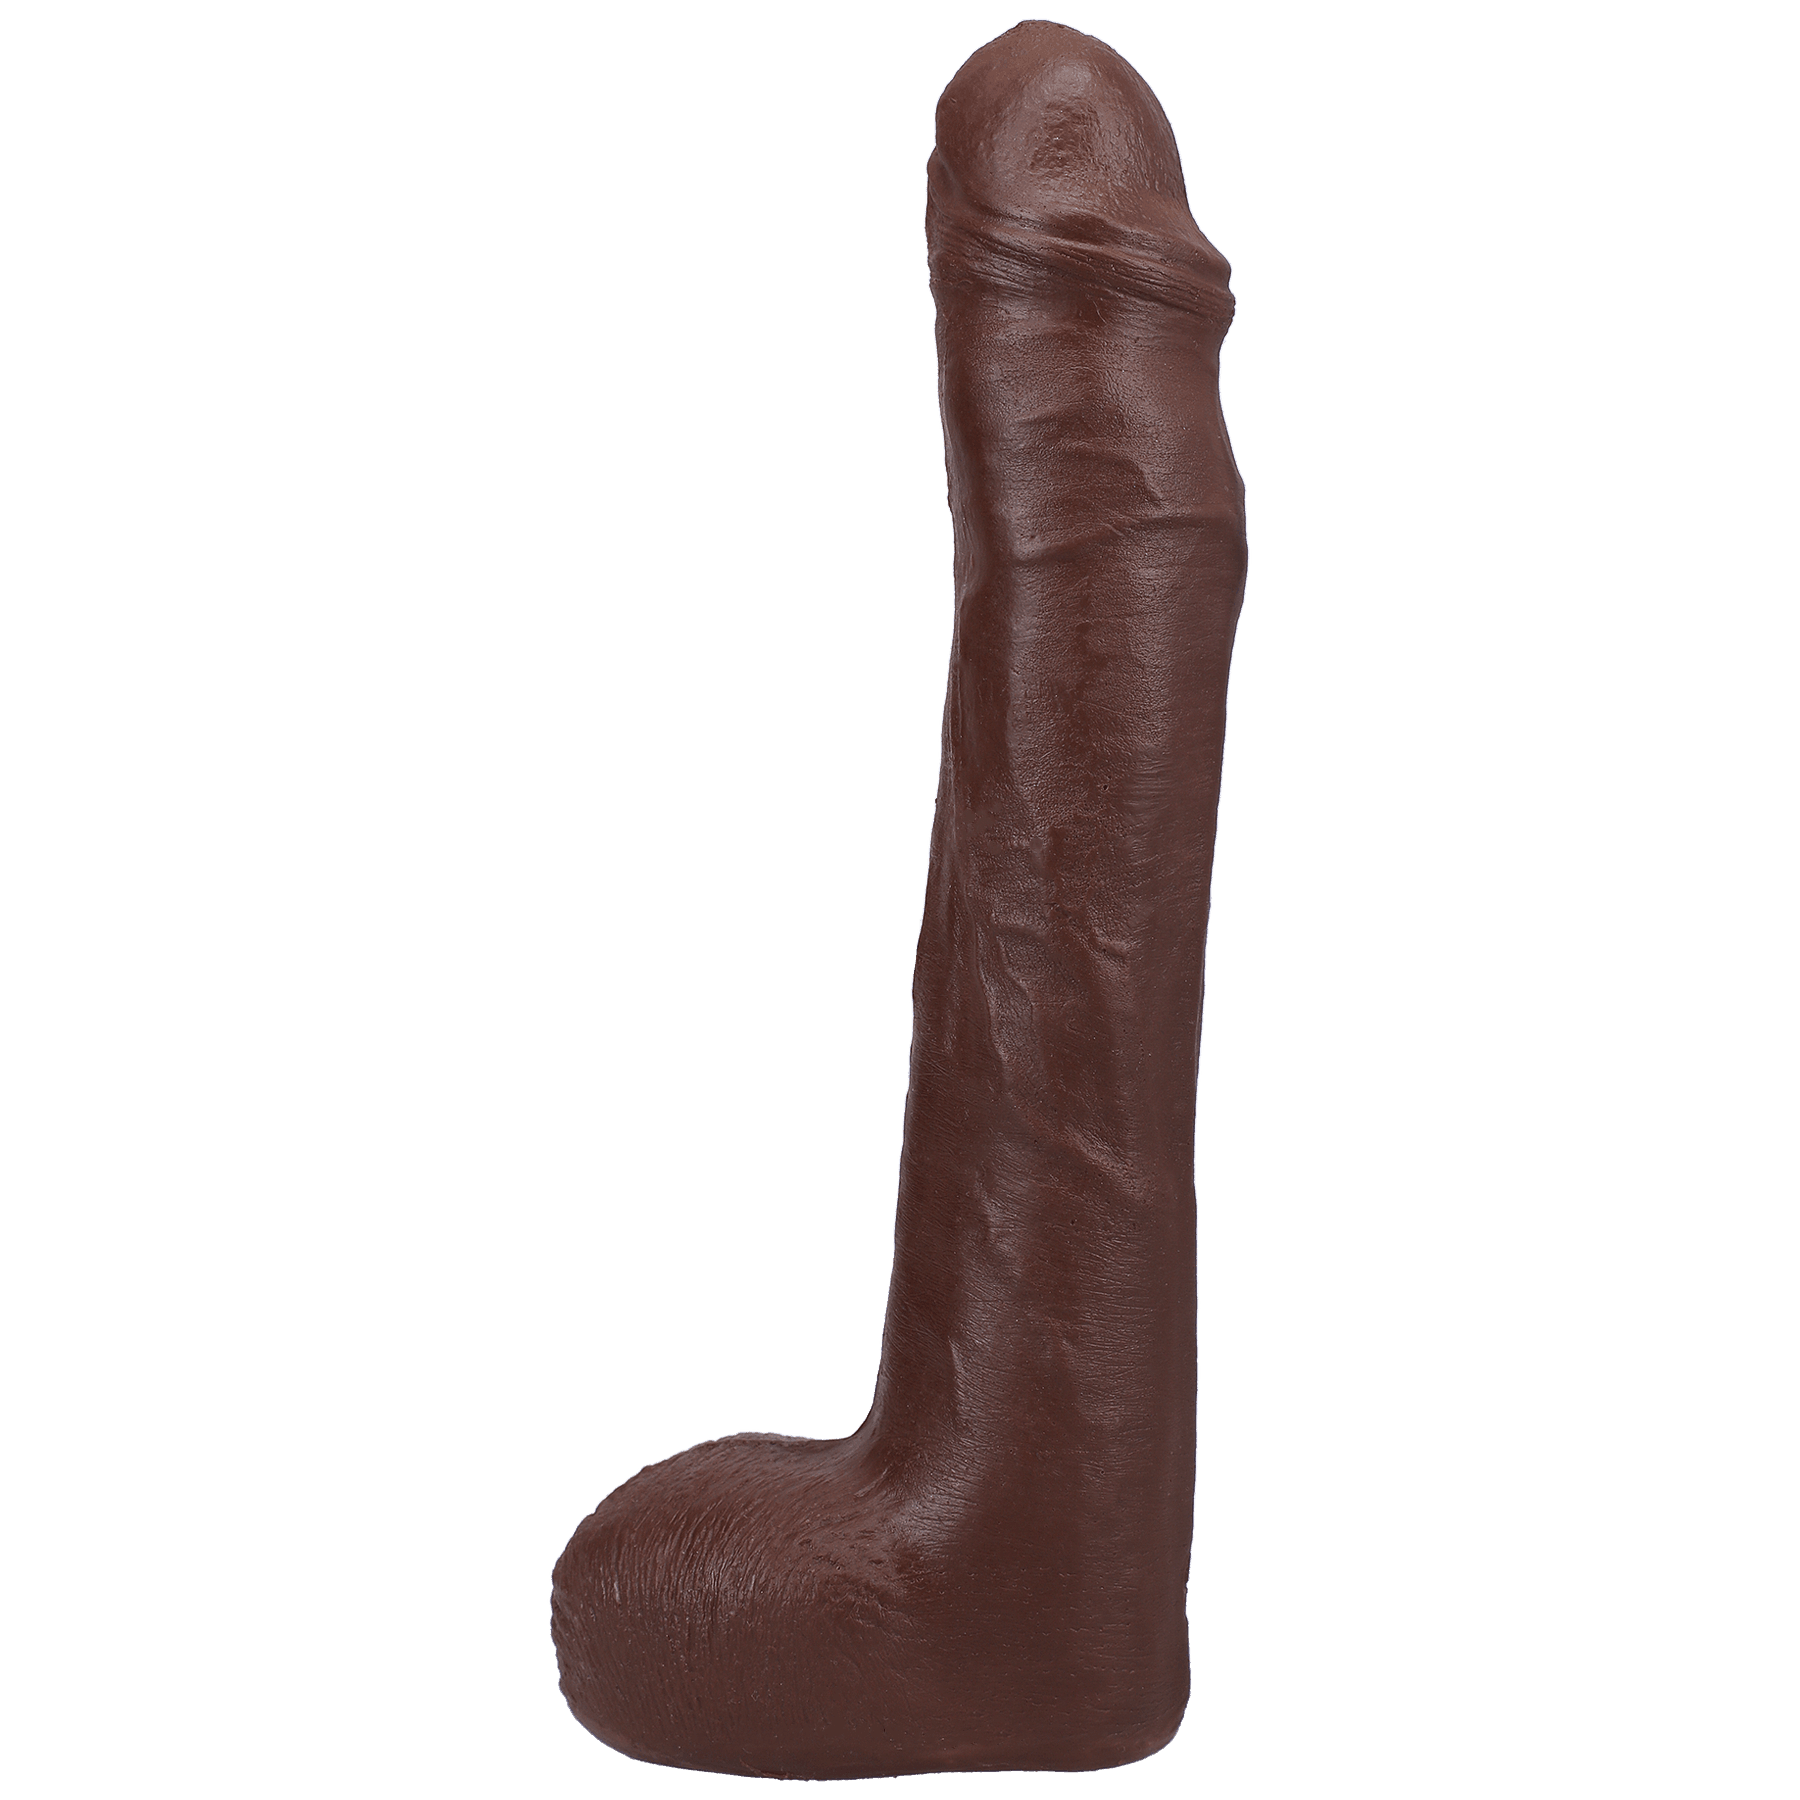 Doc Johnson Signature Cock Anton Harden 11in Dildo - Buy At Luxury Toy X - Free 3-Day Shipping